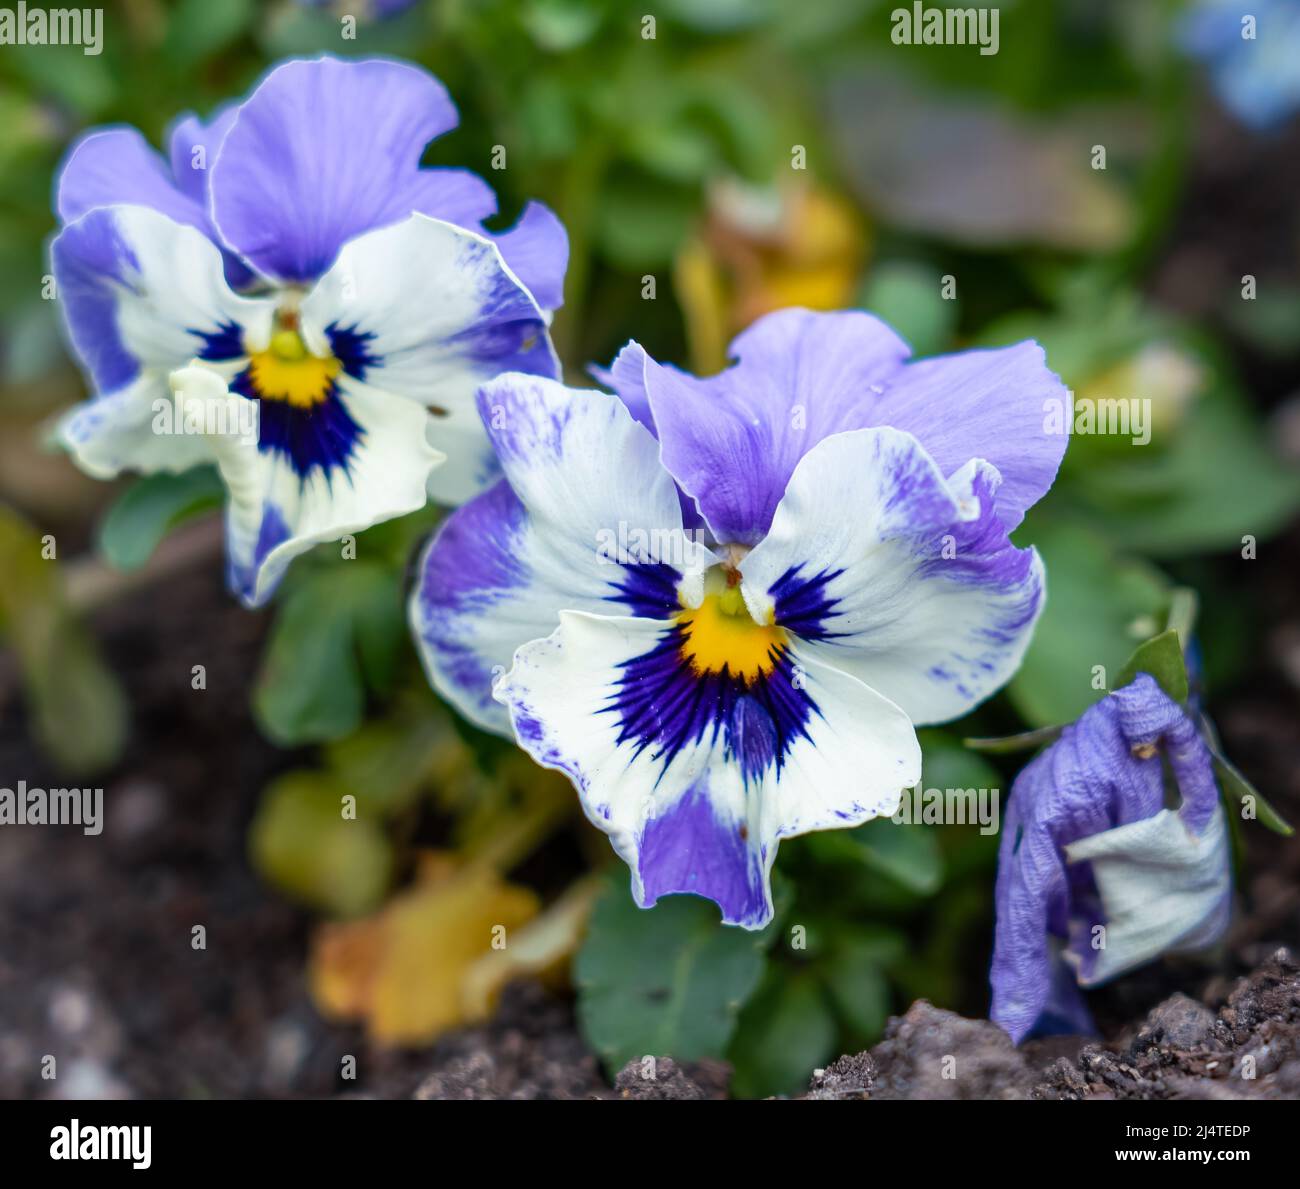 close up of a beautiful spring flowering whiote and mauve Pansies (Viola tricolor var. hortensis) Stock Photo